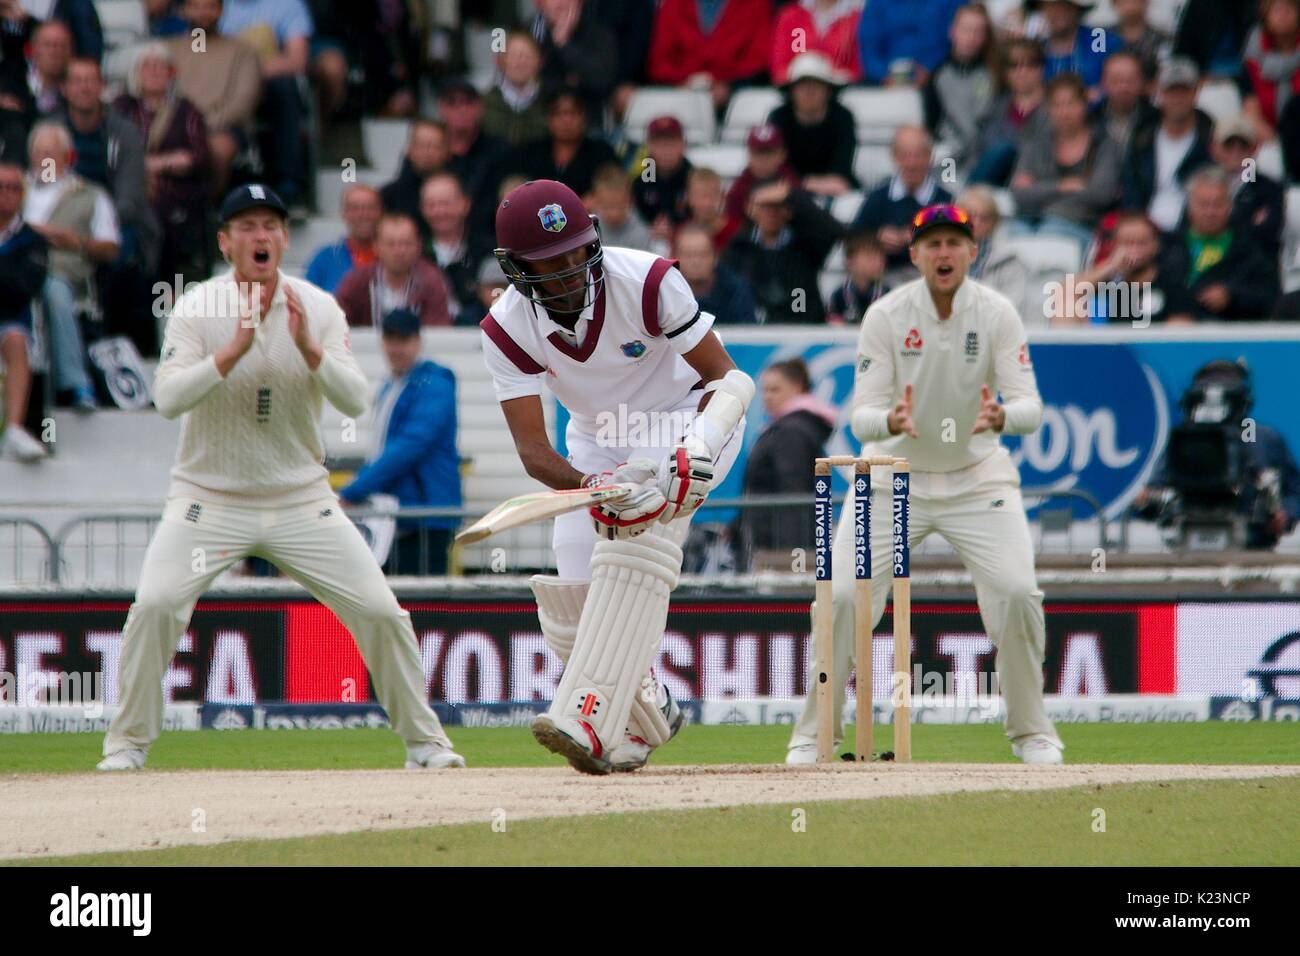 Leeds, UK. 29th Aug, 2017. Kraigg Brathwaite batting for West Indies against England on the last day of the second Investec Test Match at Headingley Cricket Ground. Credit: Colin Edwards/Alamy Live News Stock Photo